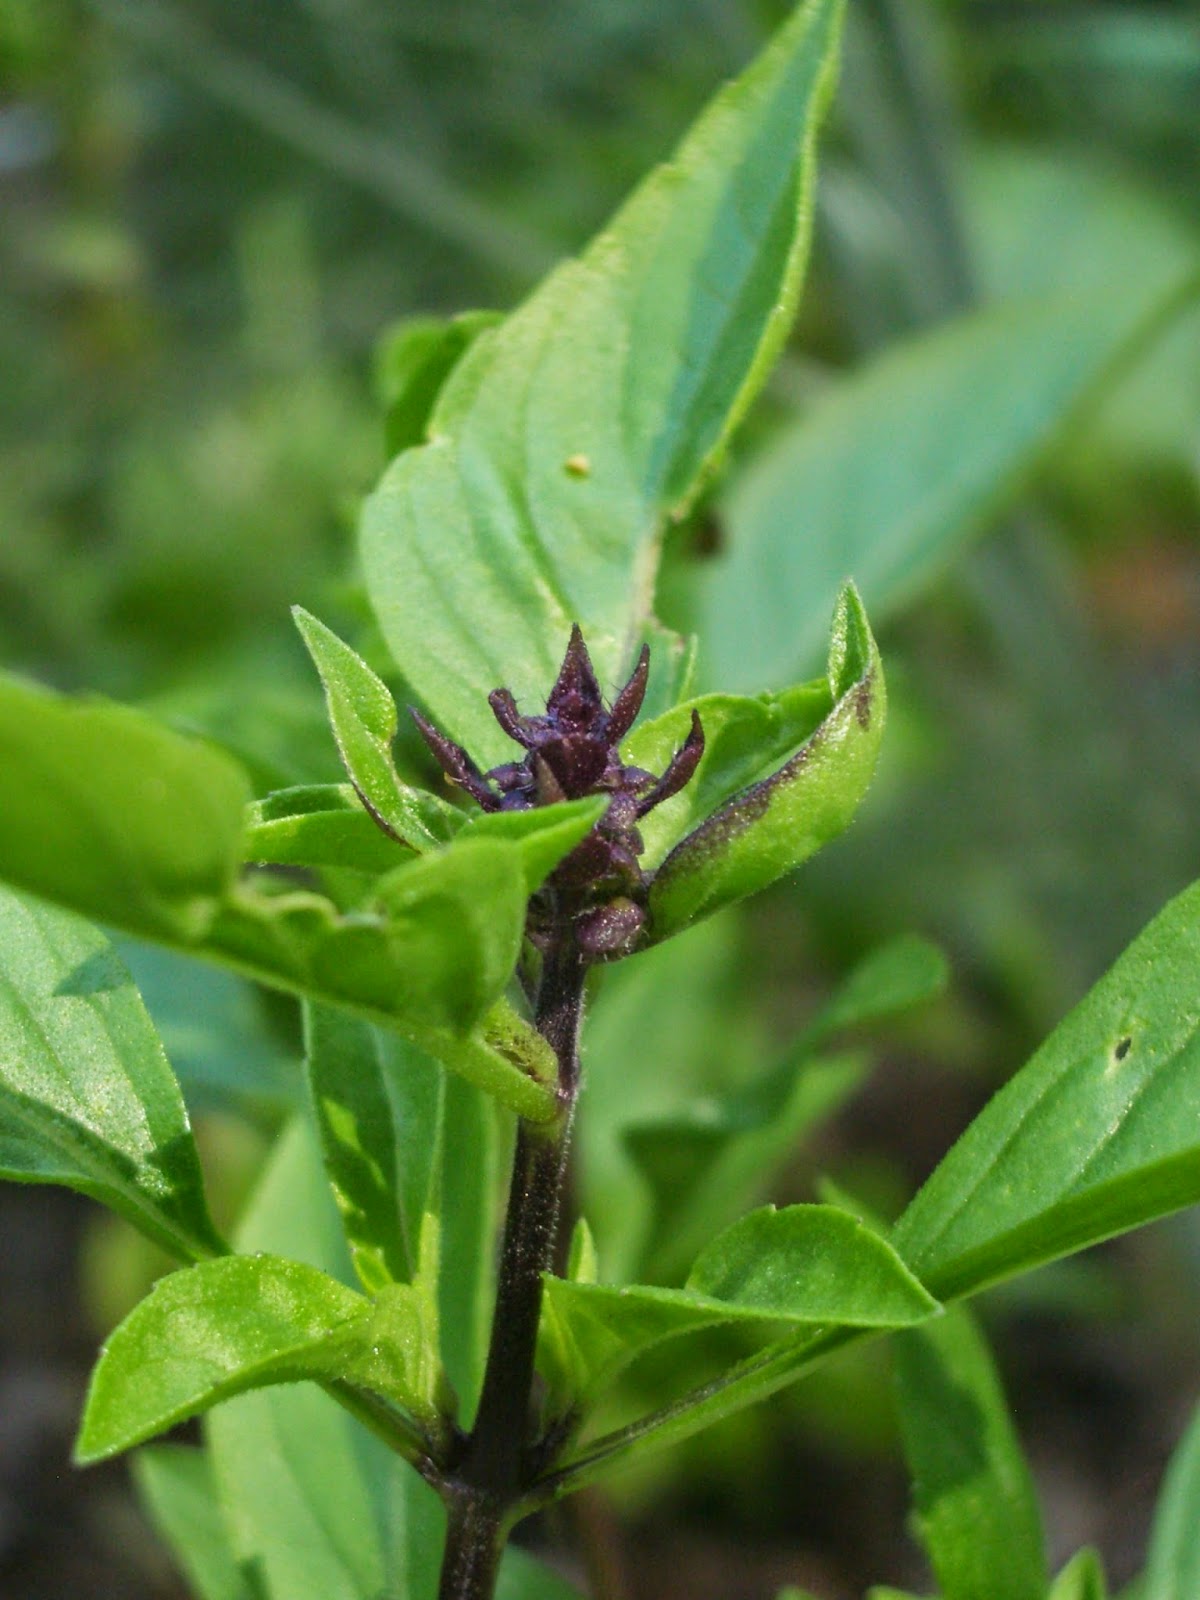 Eat Well: Worldly Basil: Expand Your Ocimum